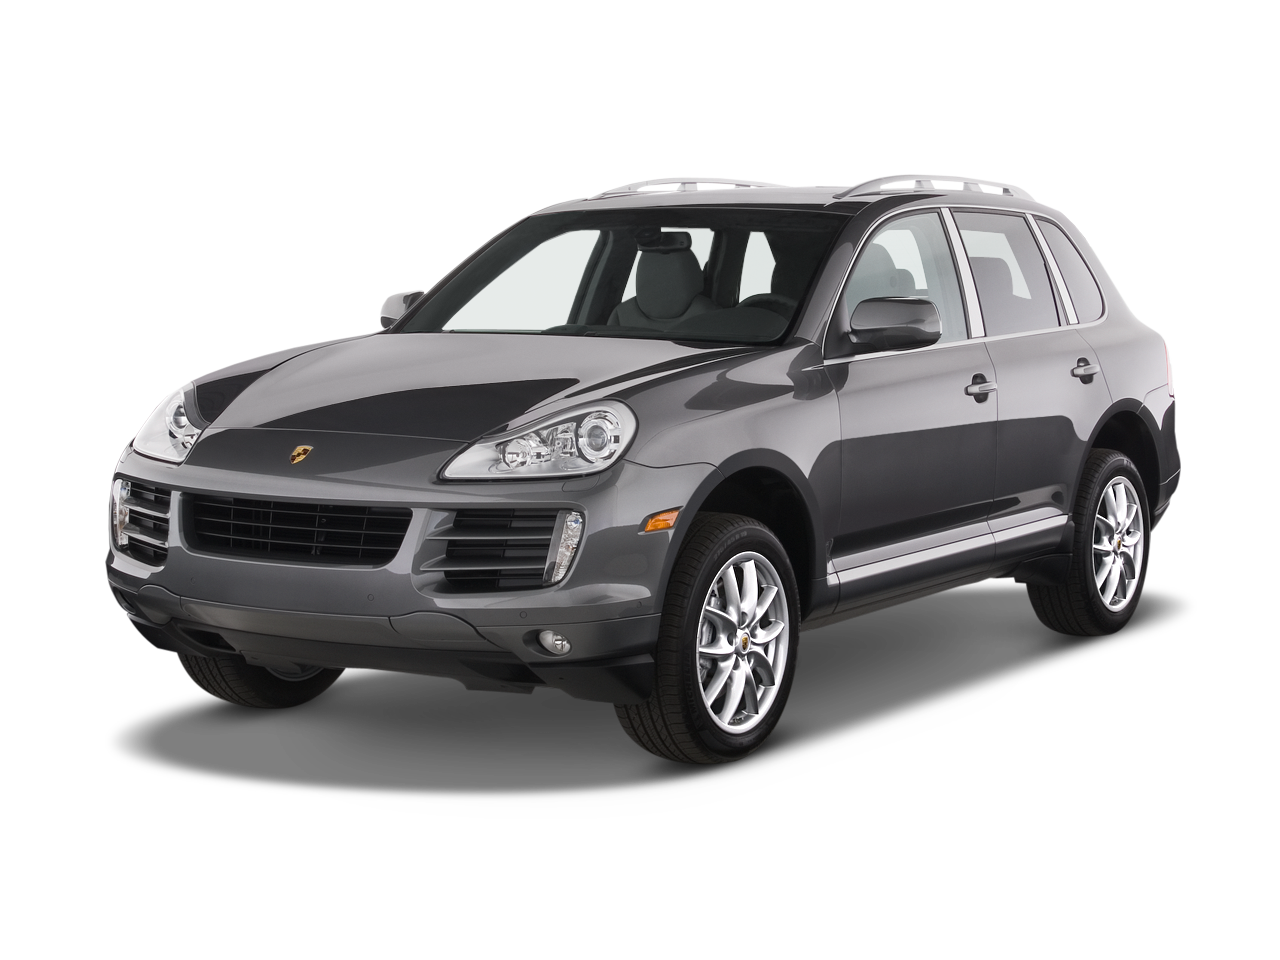 2008 Porsche Cayenne S 0-60 Times, Top Speed, Specs, Quarter Mile, And Wallpapers - Mycarspecs United States / Usa